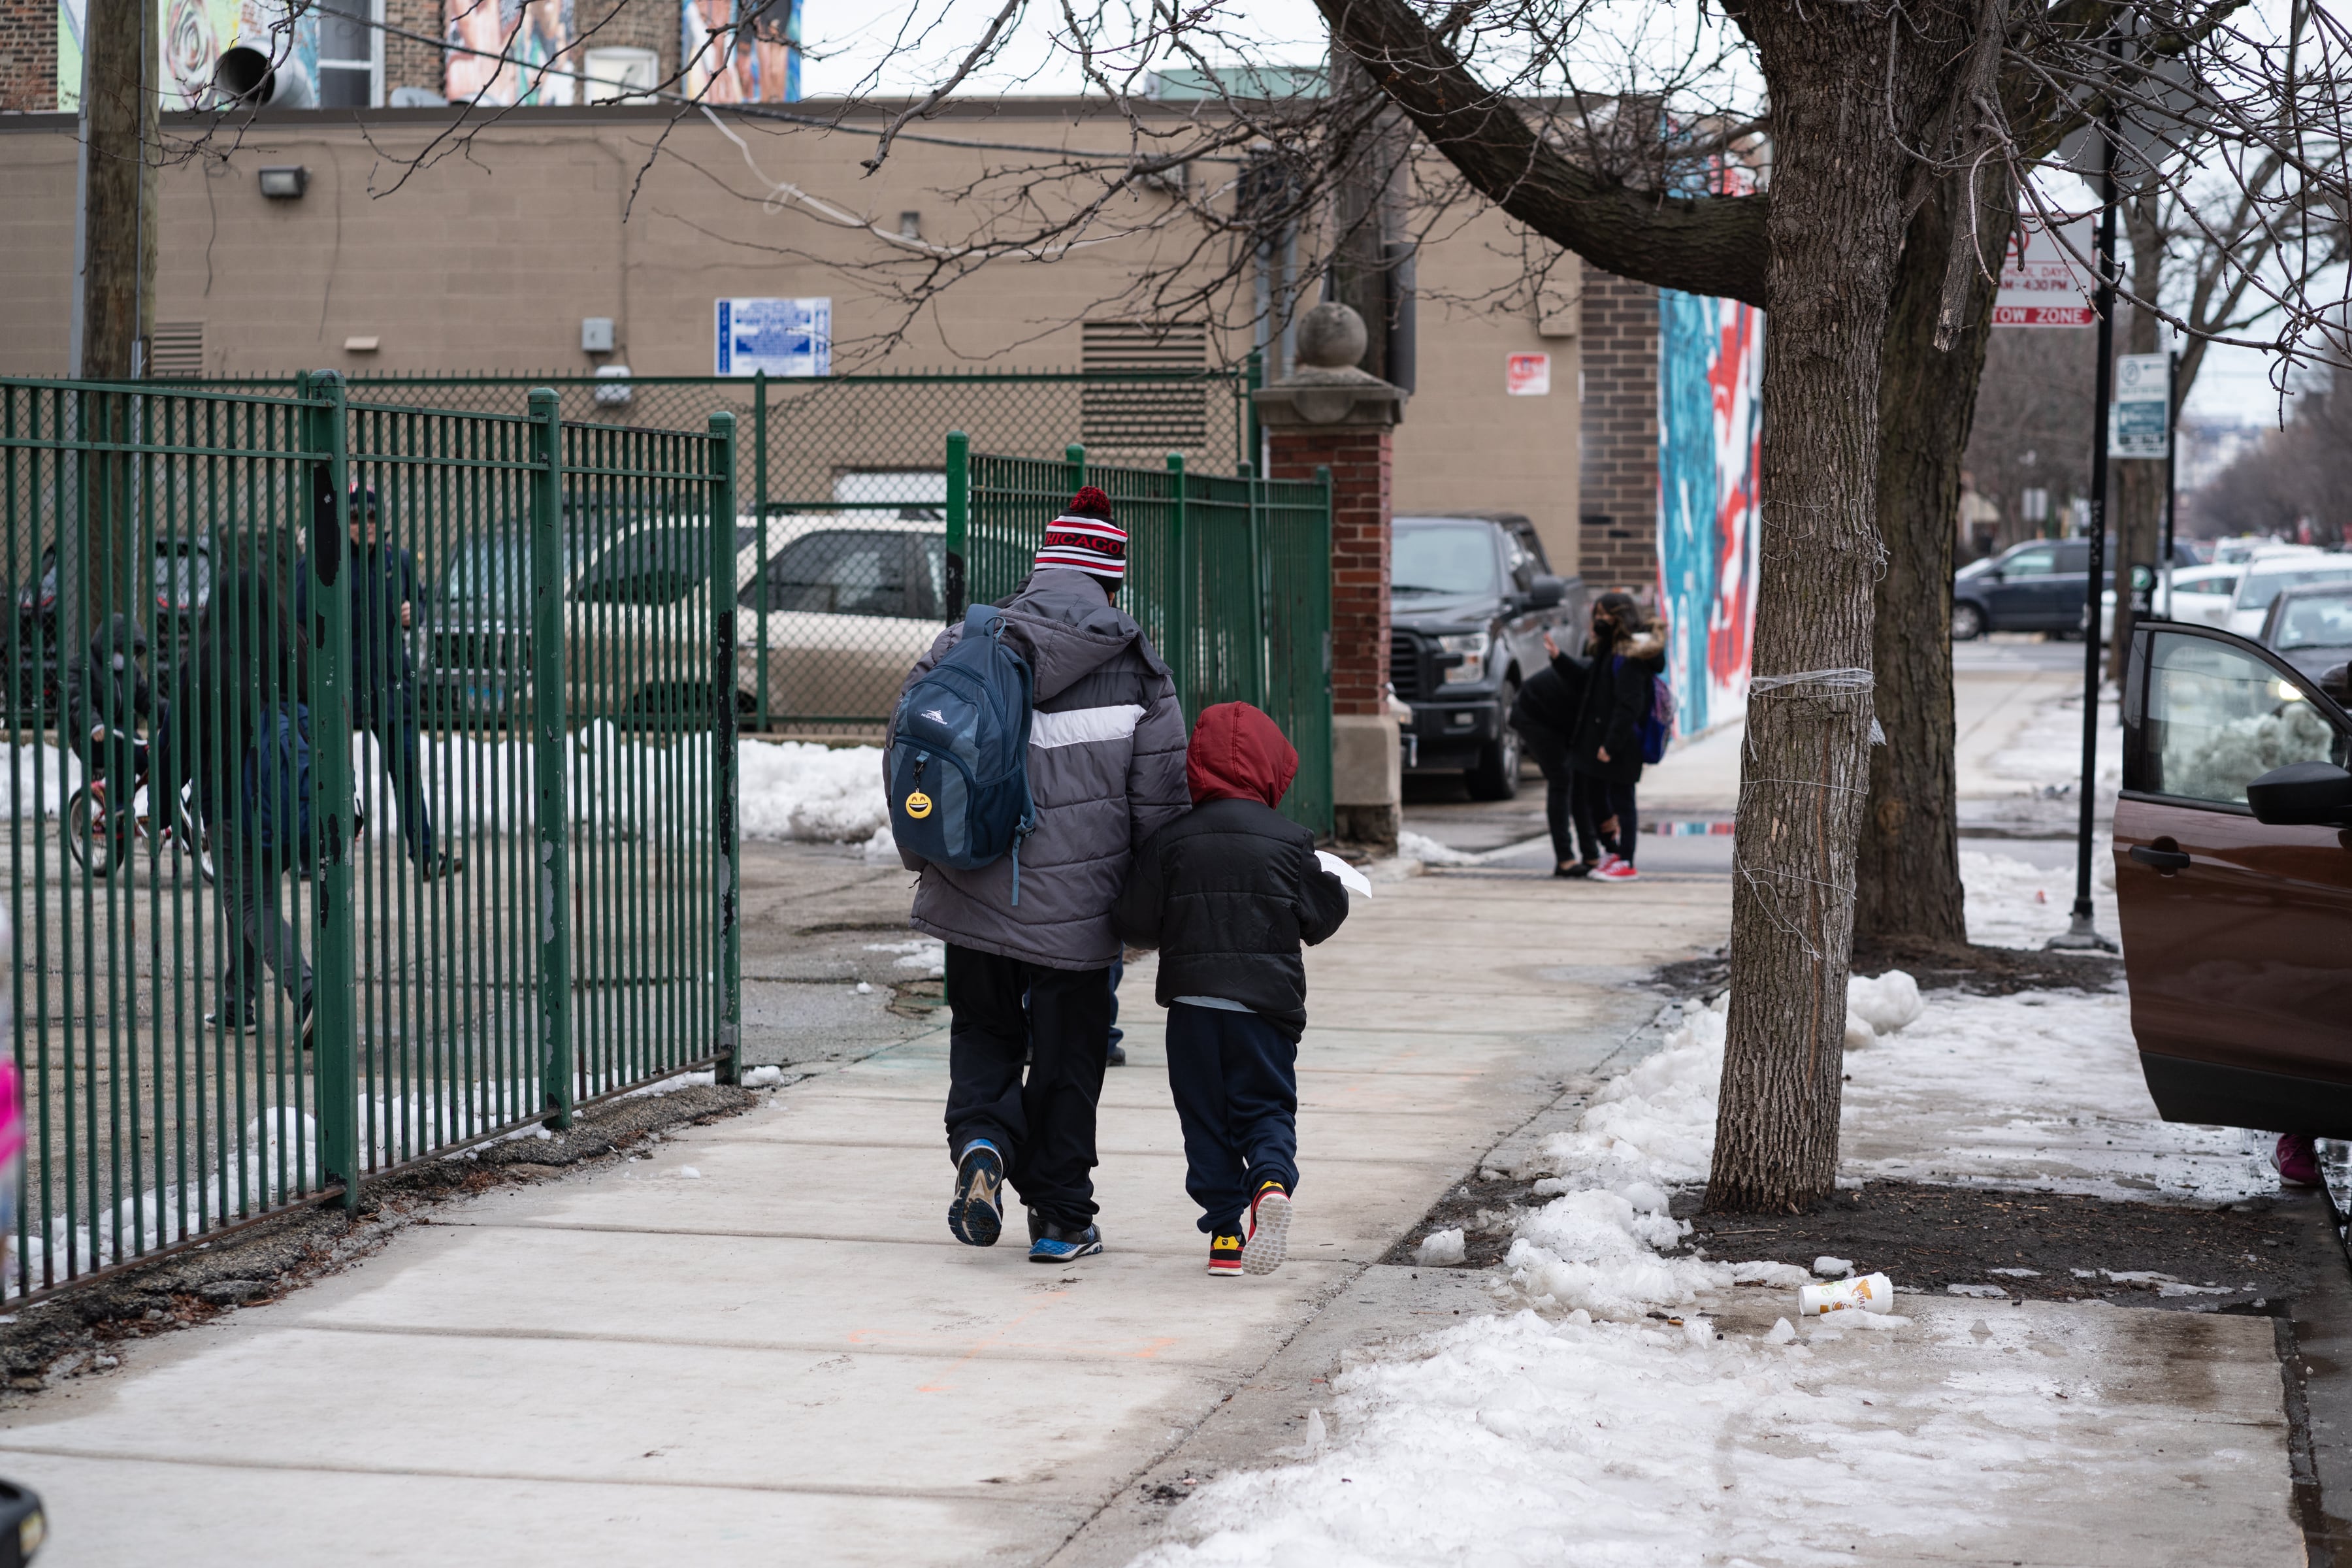 A man and a child in winter coats walk on the sidewalk by a school building.